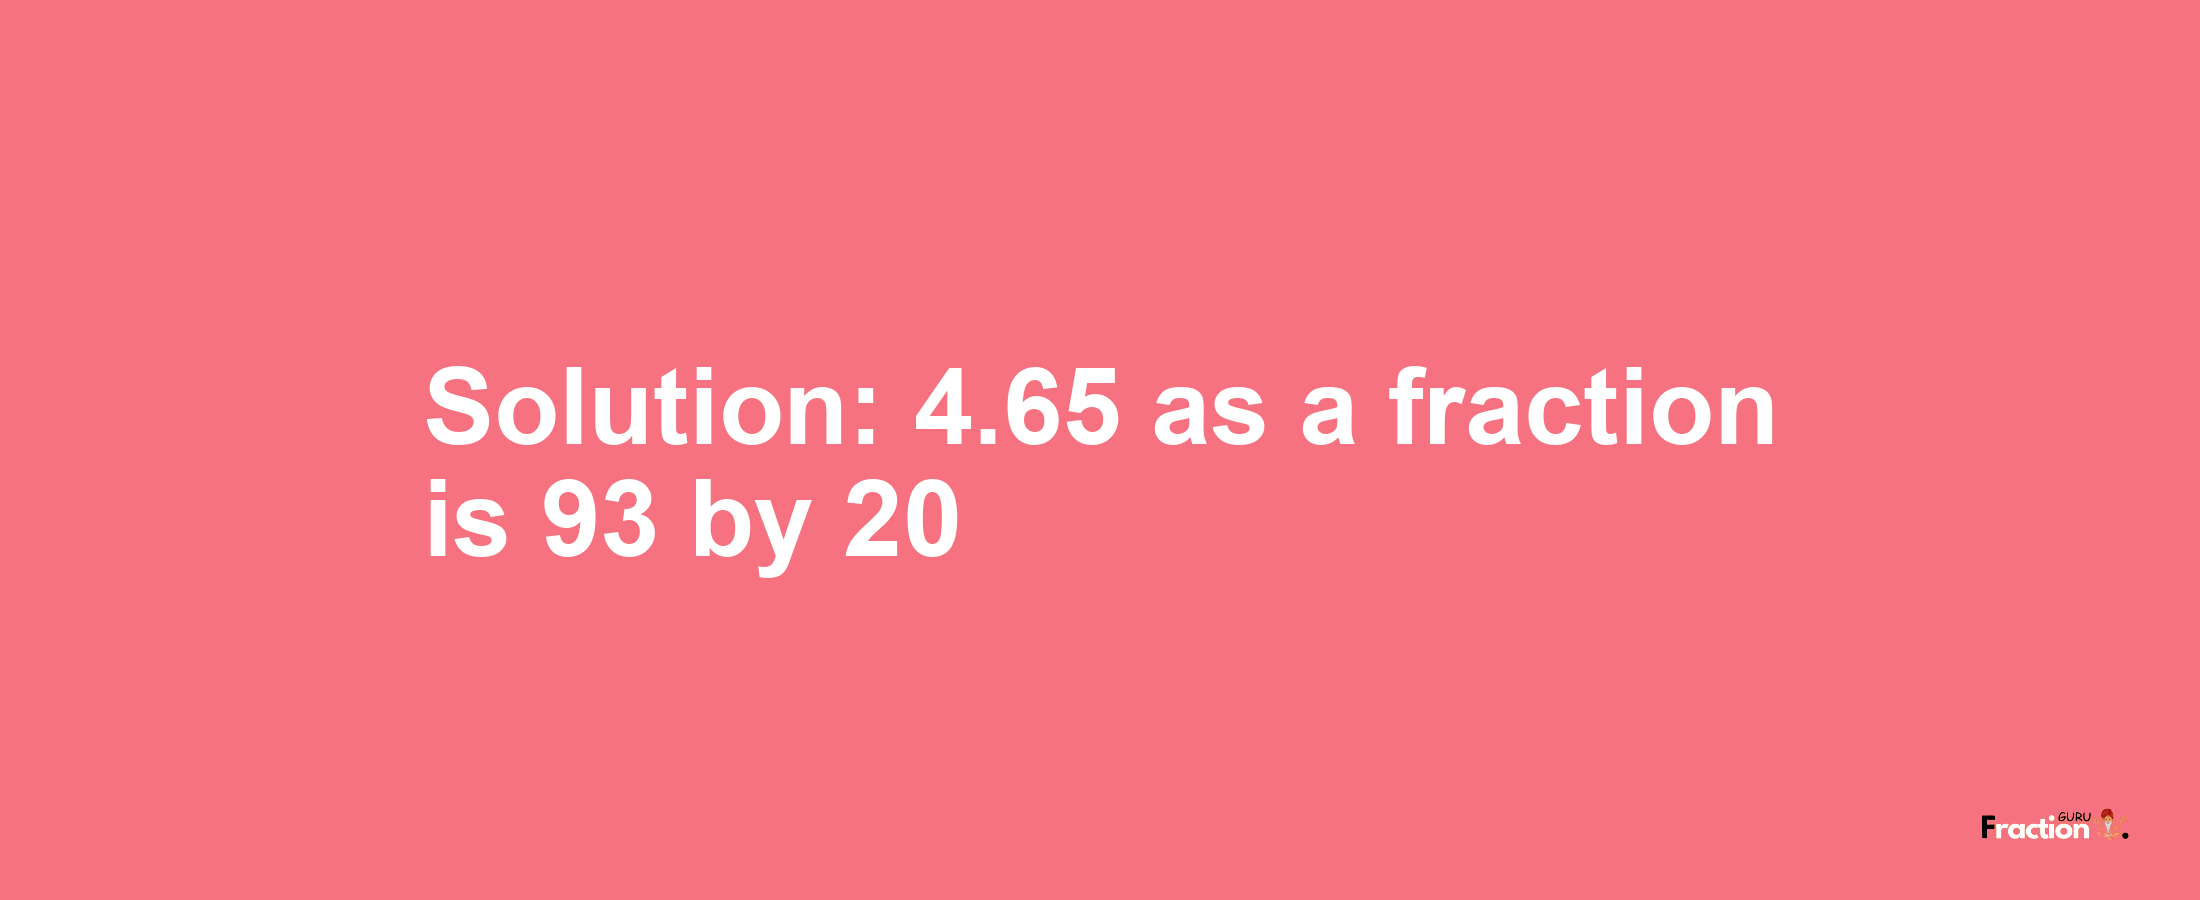 Solution:4.65 as a fraction is 93/20